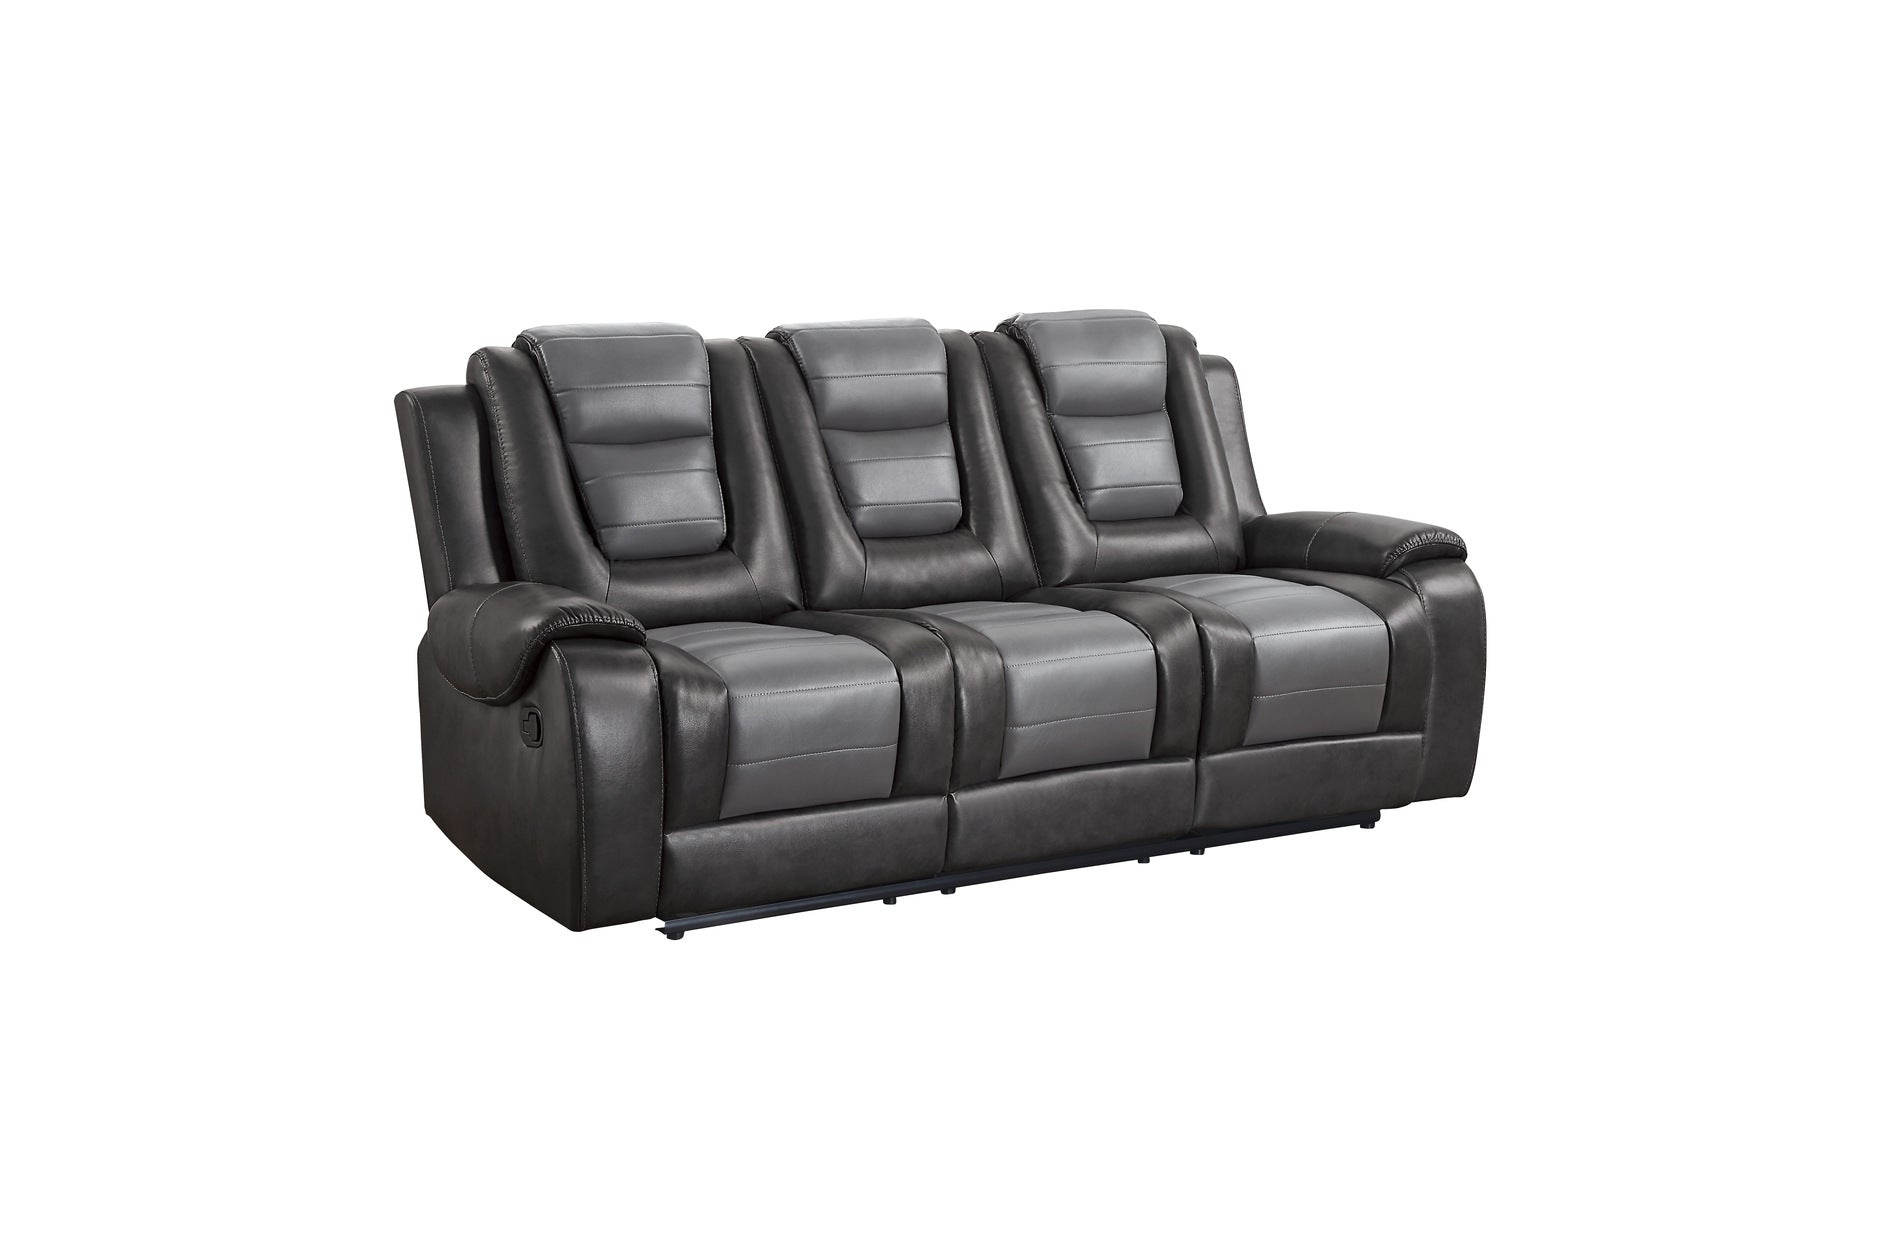 Double Reclining Sofa with Center Drop-Down Cup Holders